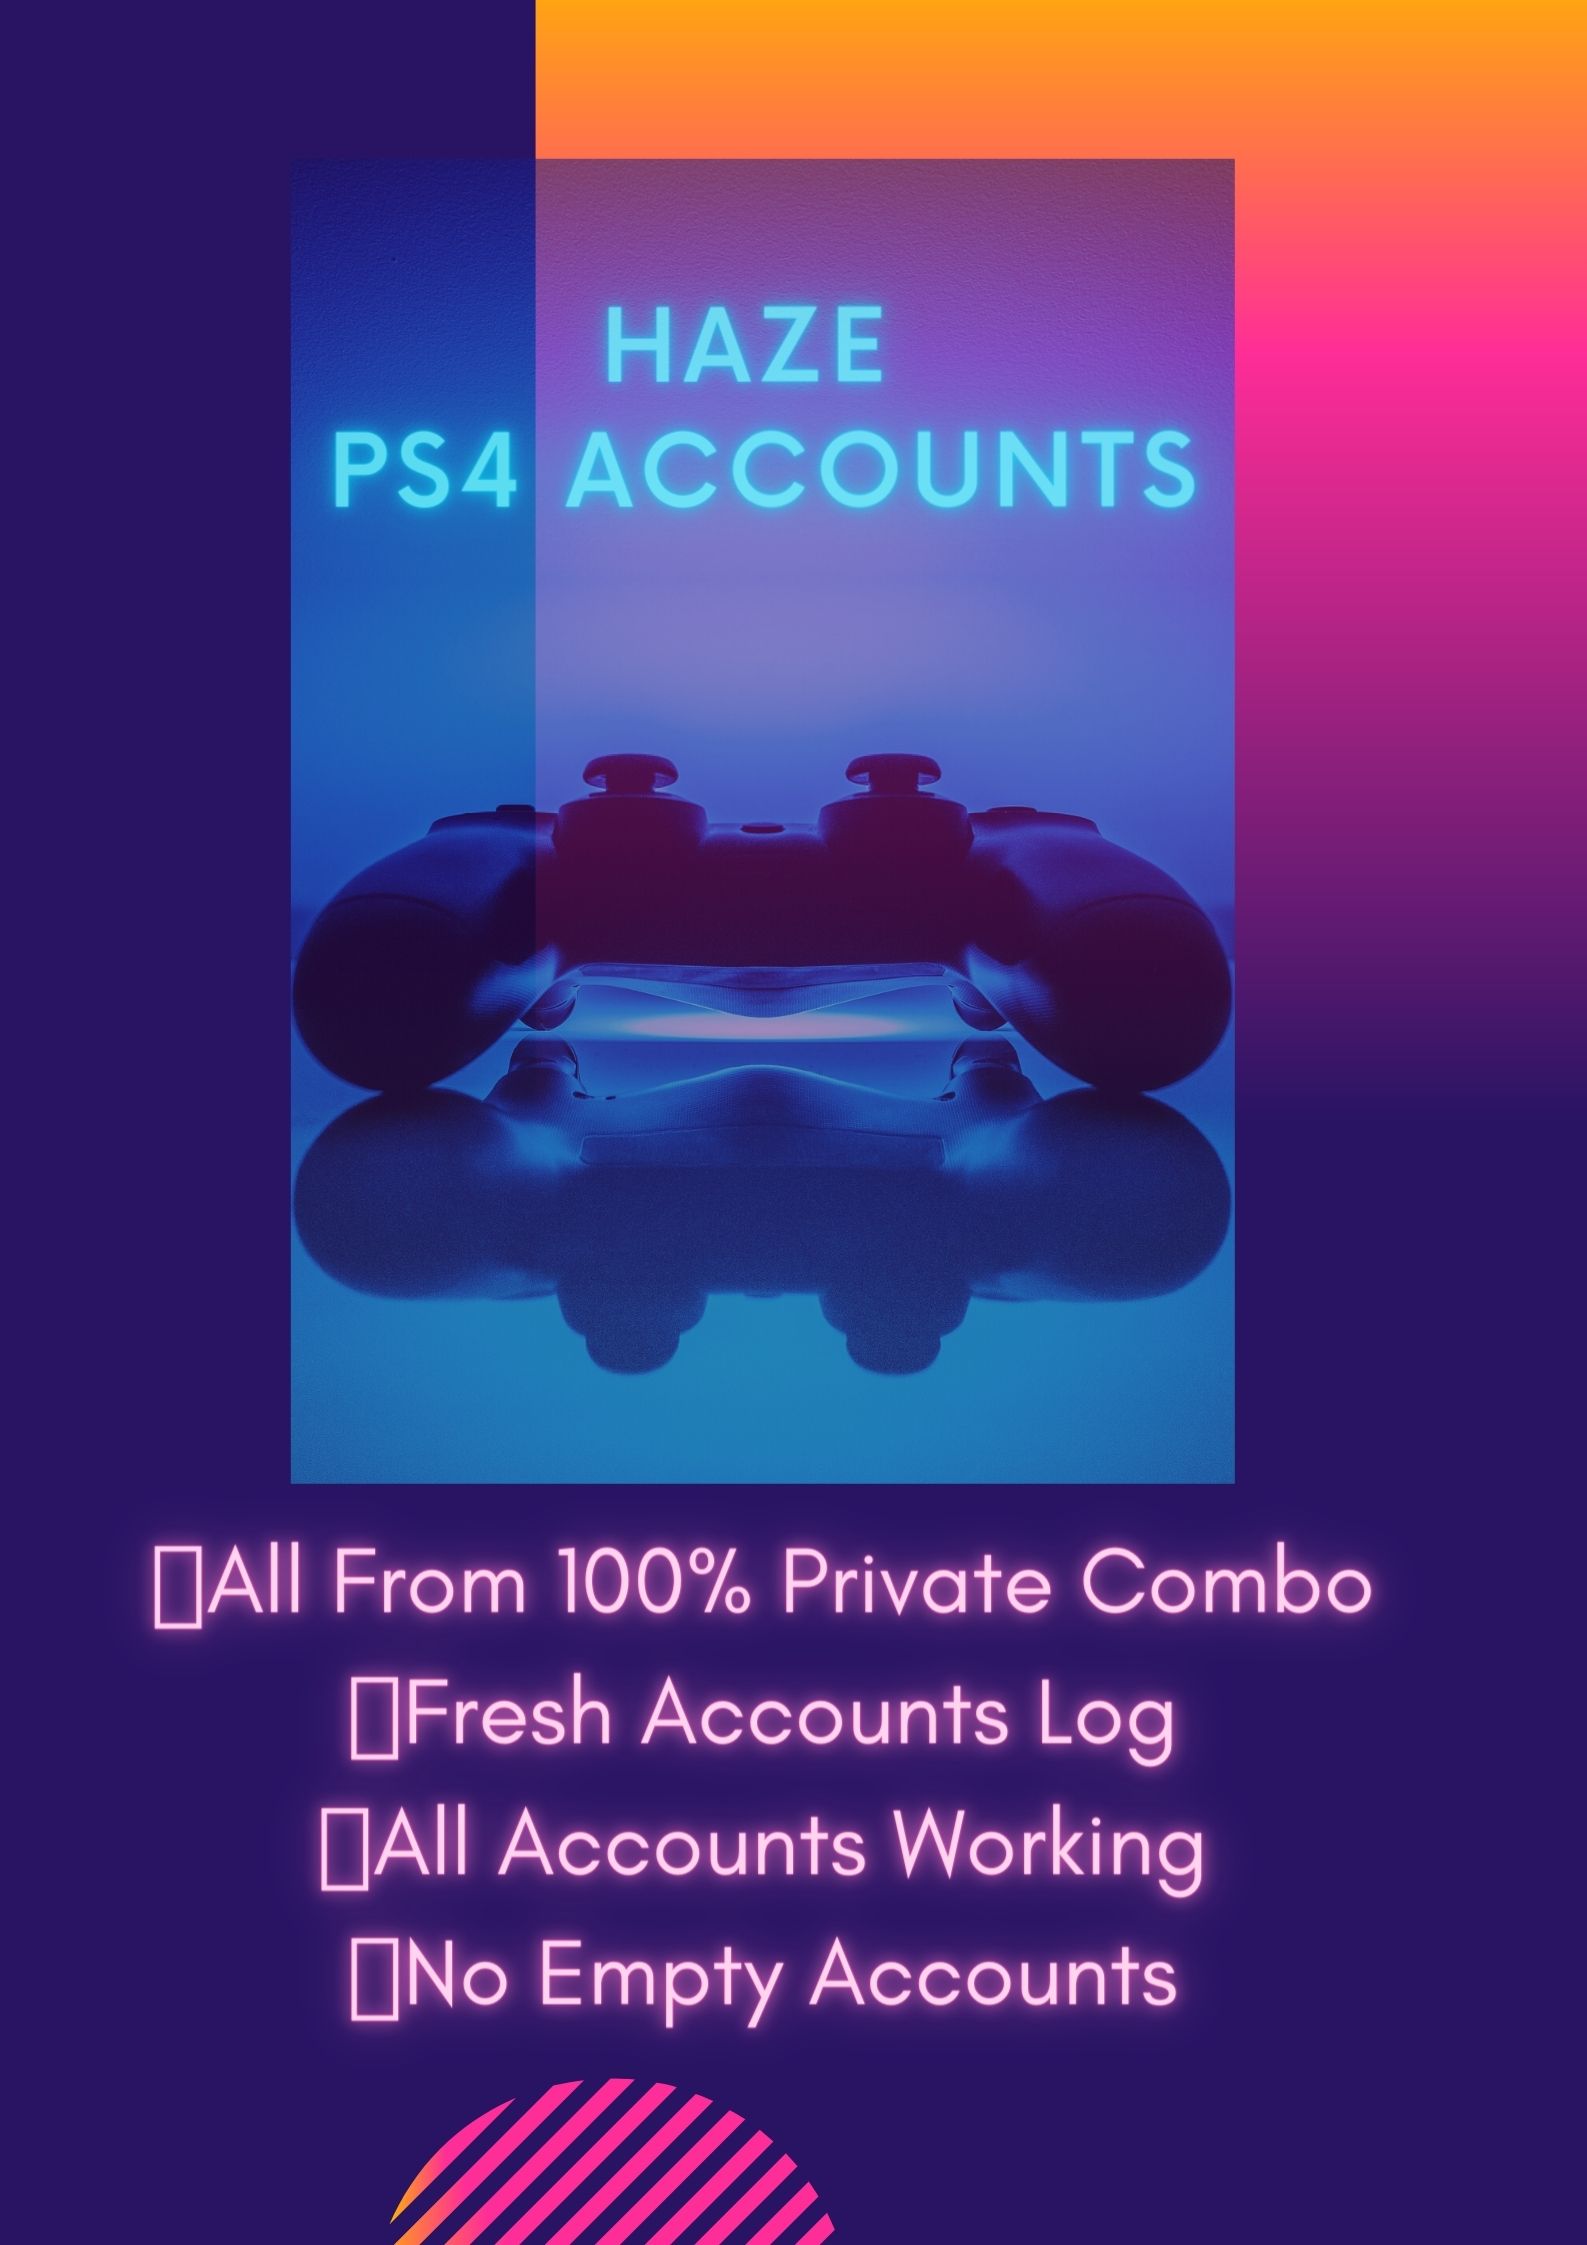 Ps4 accounts in bulk | cheap | +30 aaa new games &amp; private combos | psn |-poster-hazedeal-jpg